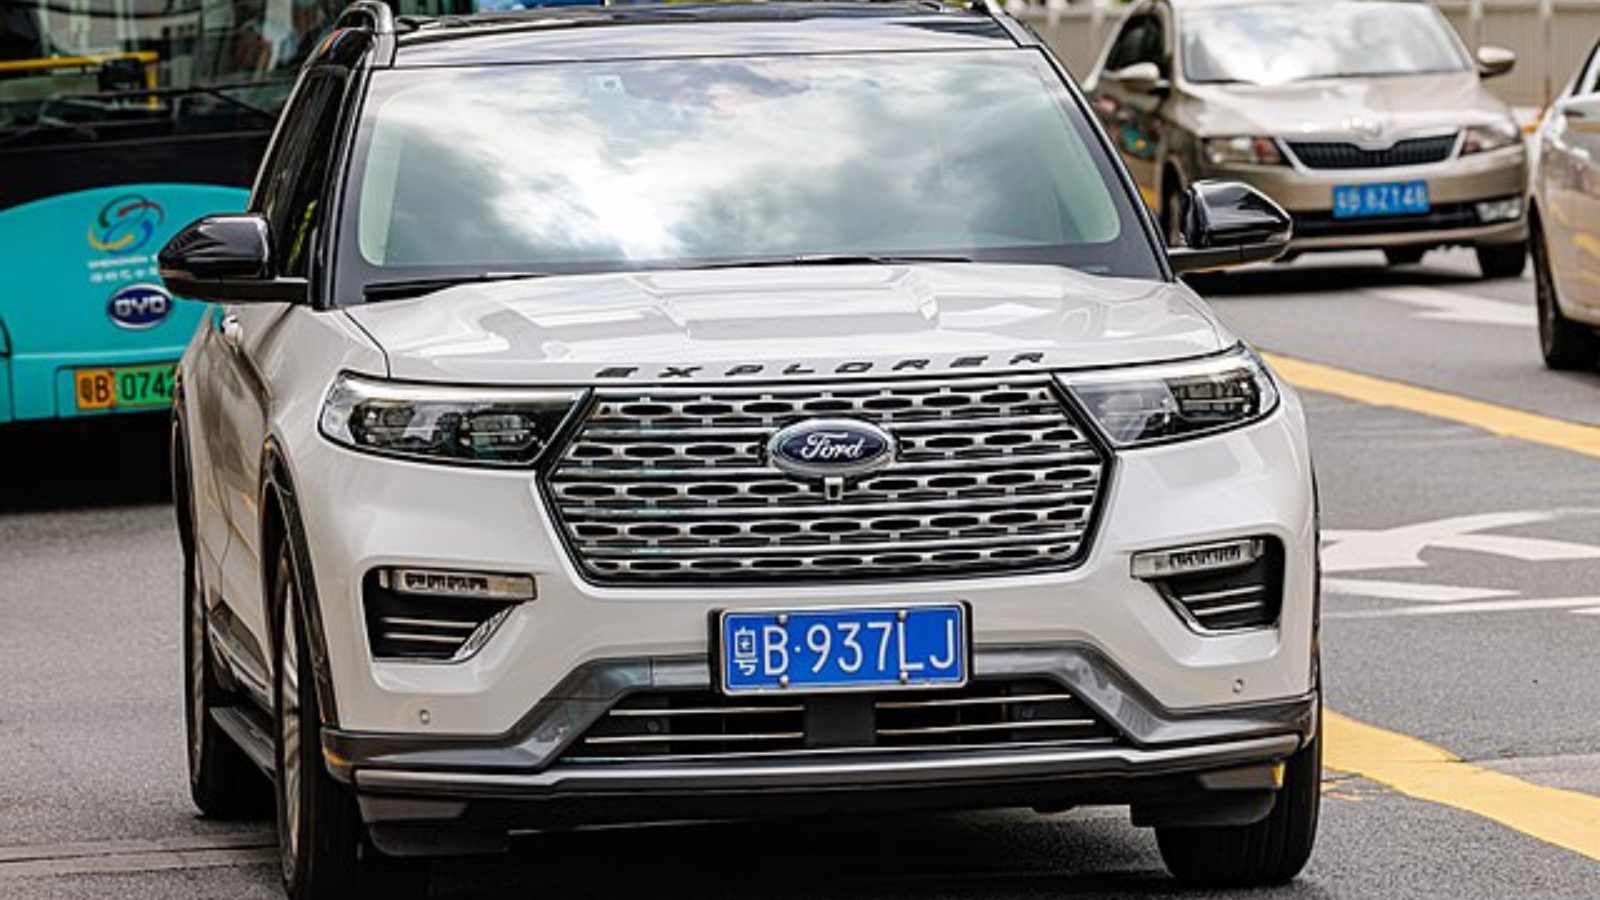 <p>The Ford Explorer is still the <a href="https://frenzhub.com/the-best-used-family-cars-with-minimal-maintenance-cost-top-picks-for-budget-friendly-rides/" rel="noopener">most affordable</a> option in the sport utility vehicle (SUV) market. It’s still one of the least expensive SUVs, with a new model beginning at about $30,000. It is renowned for havingextremely lowmaintenance expenses and achieves best-in-class mileage of 20 miles per gallon in the city and 29 miles per gallon on the interstate. This SUV is strong and resilient; its owners can drive it off-road in nearly any terrain.</p> <p>In addition, it has a fantastic guarantee and several upscale interior options, including leather seats.The 2016 Ford Explorer is the SUV forthose who watch their spending; it has a solid reputation and a lengthy history.</p>